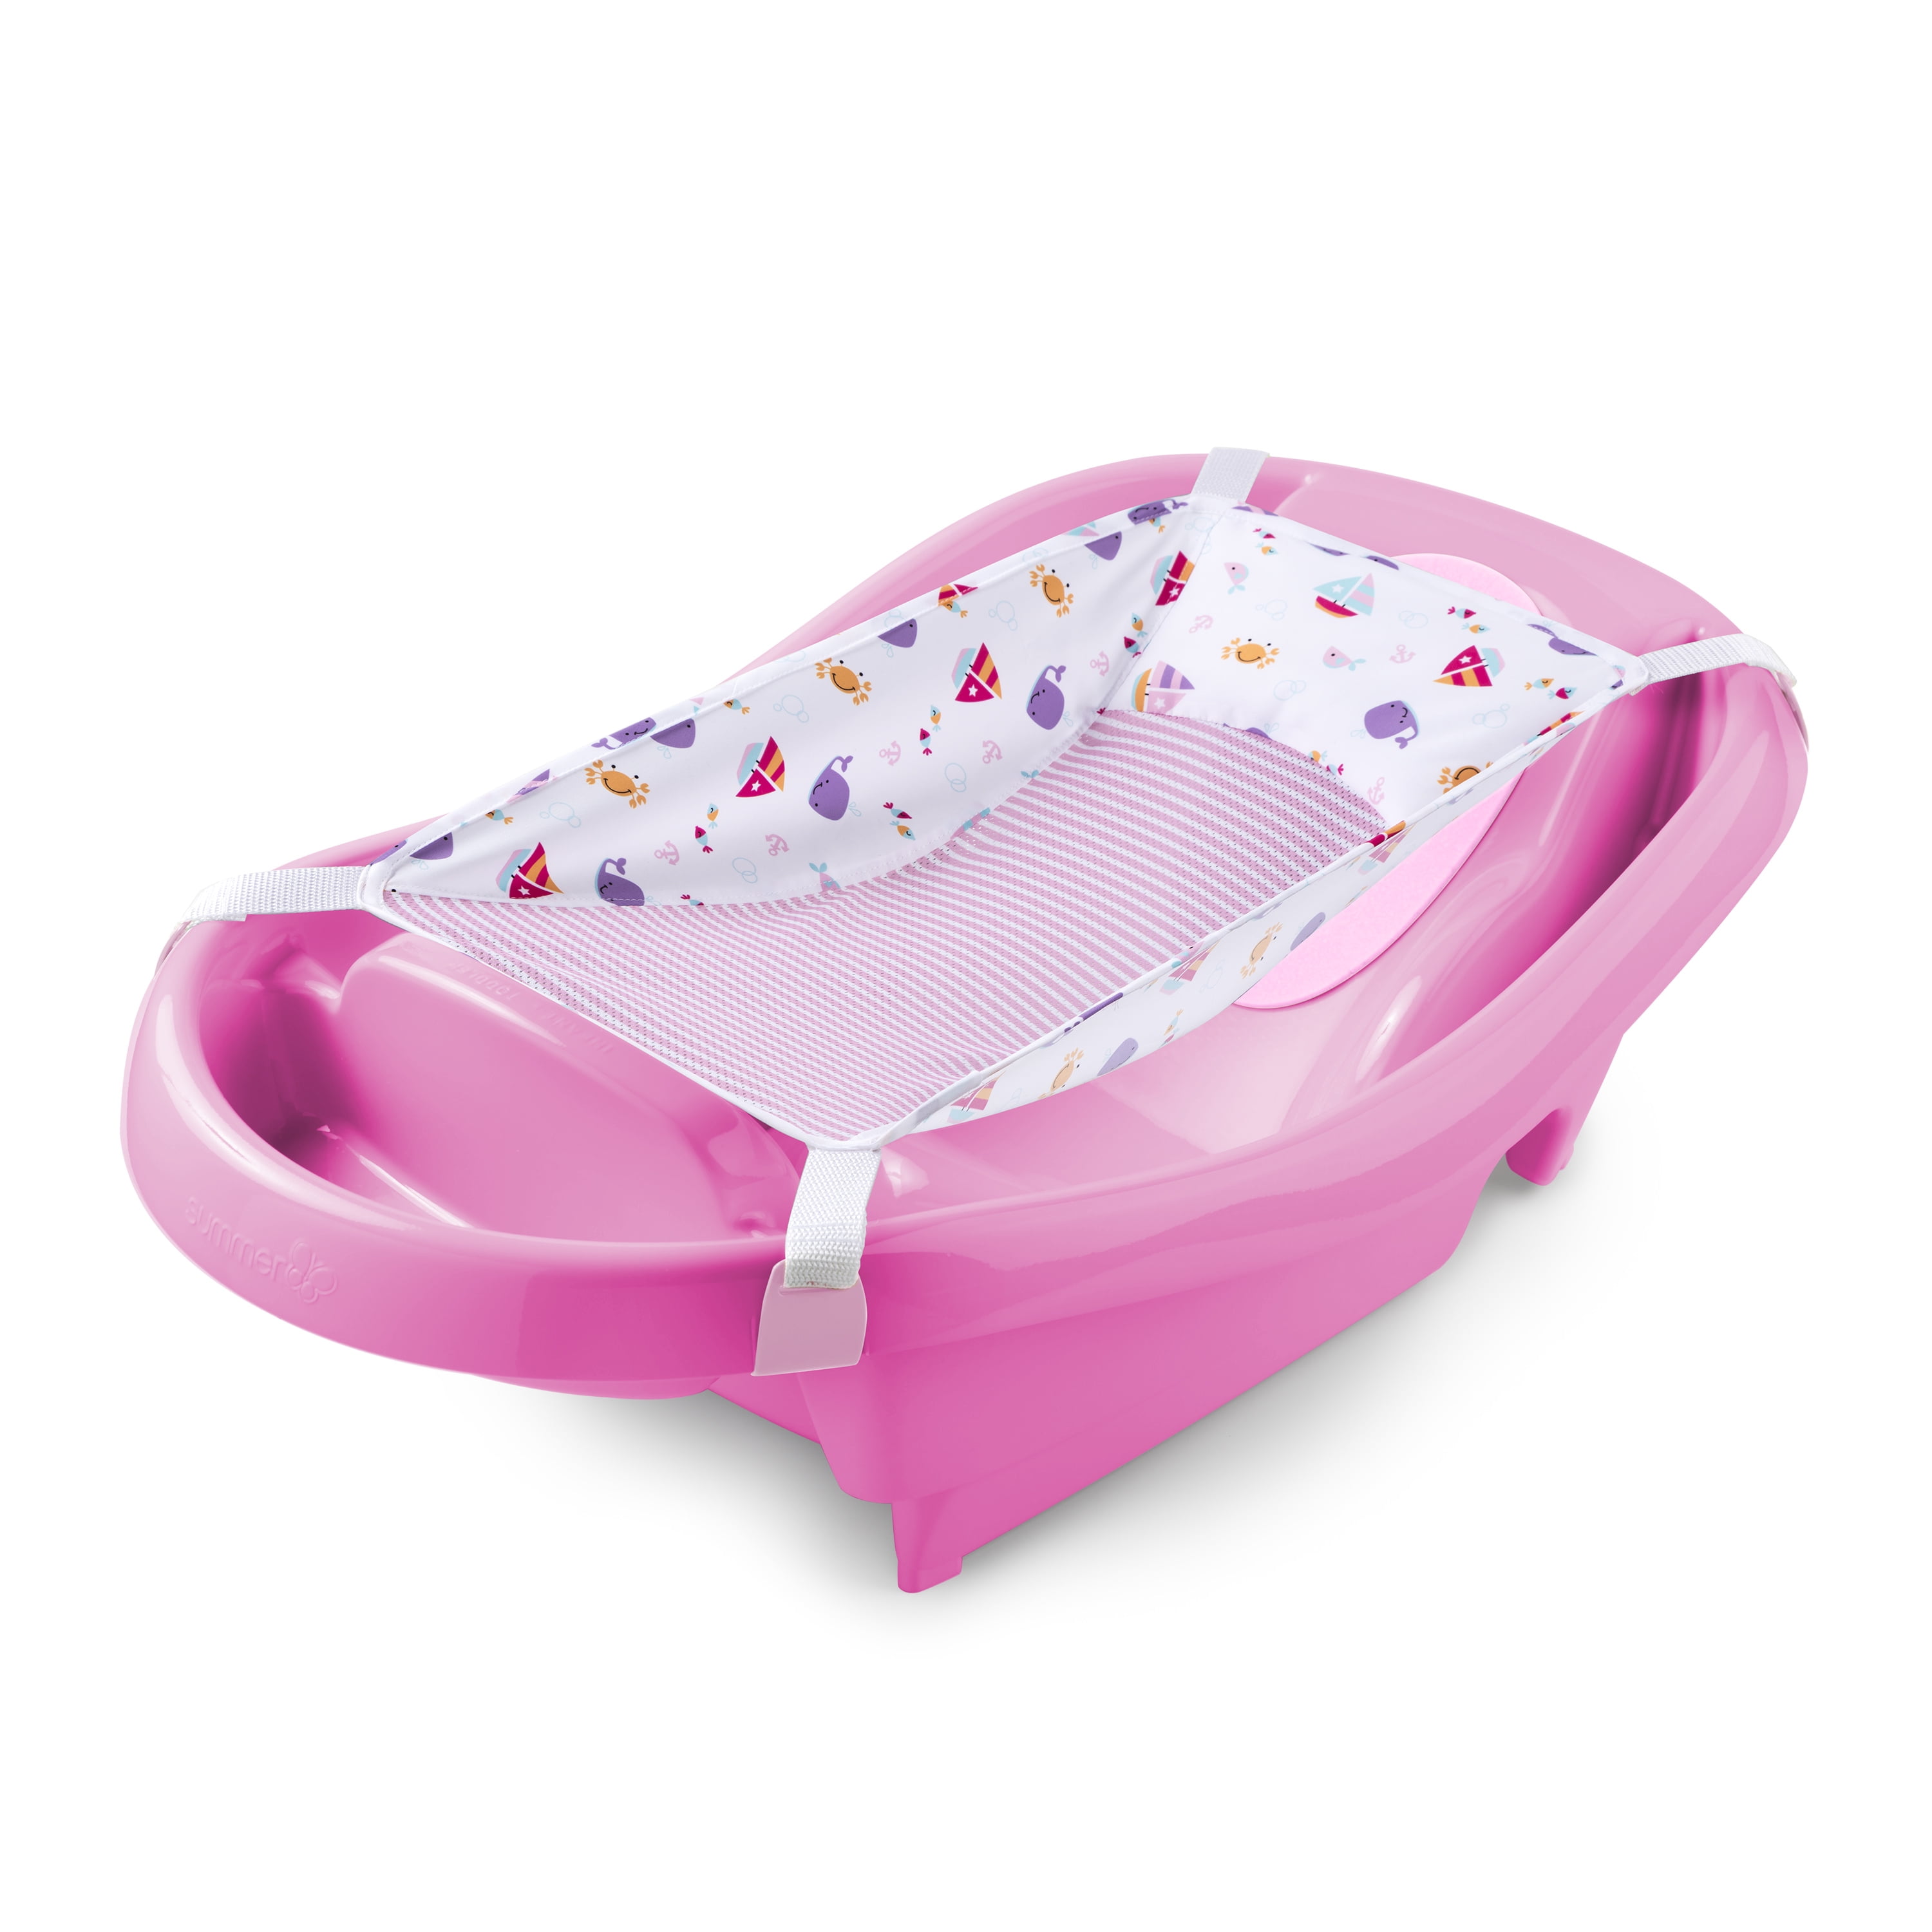 Infant Child Kids Toddler Baby Bath Bathing Dining Play Support Seat Chair Pink 